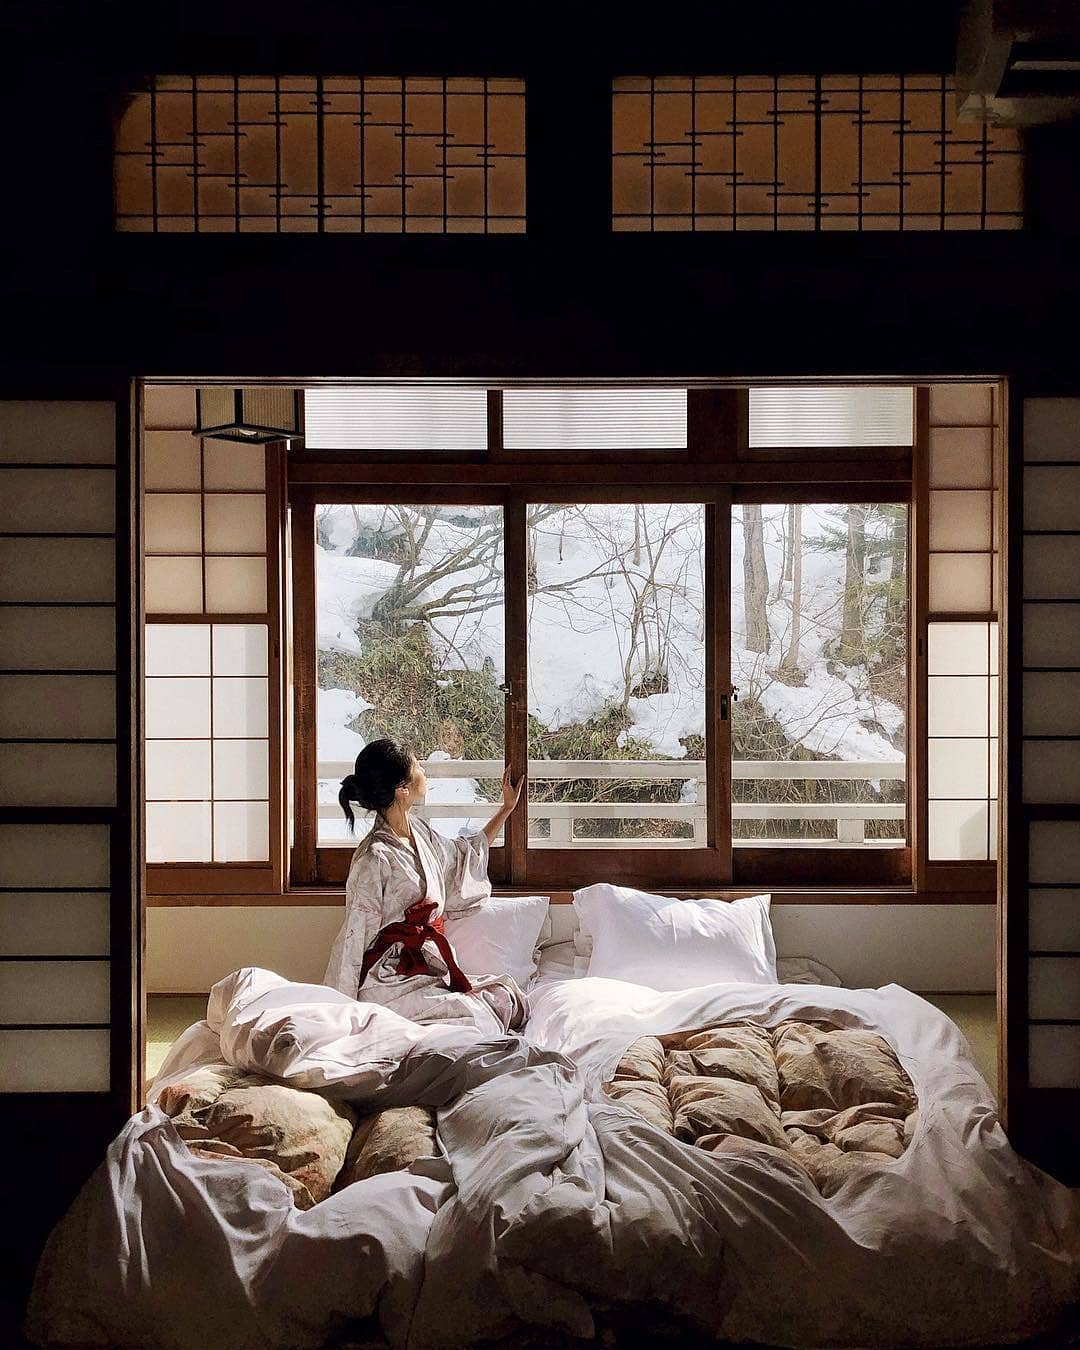 Visit Japan: Tag the person you'd like to wake up here next to ...